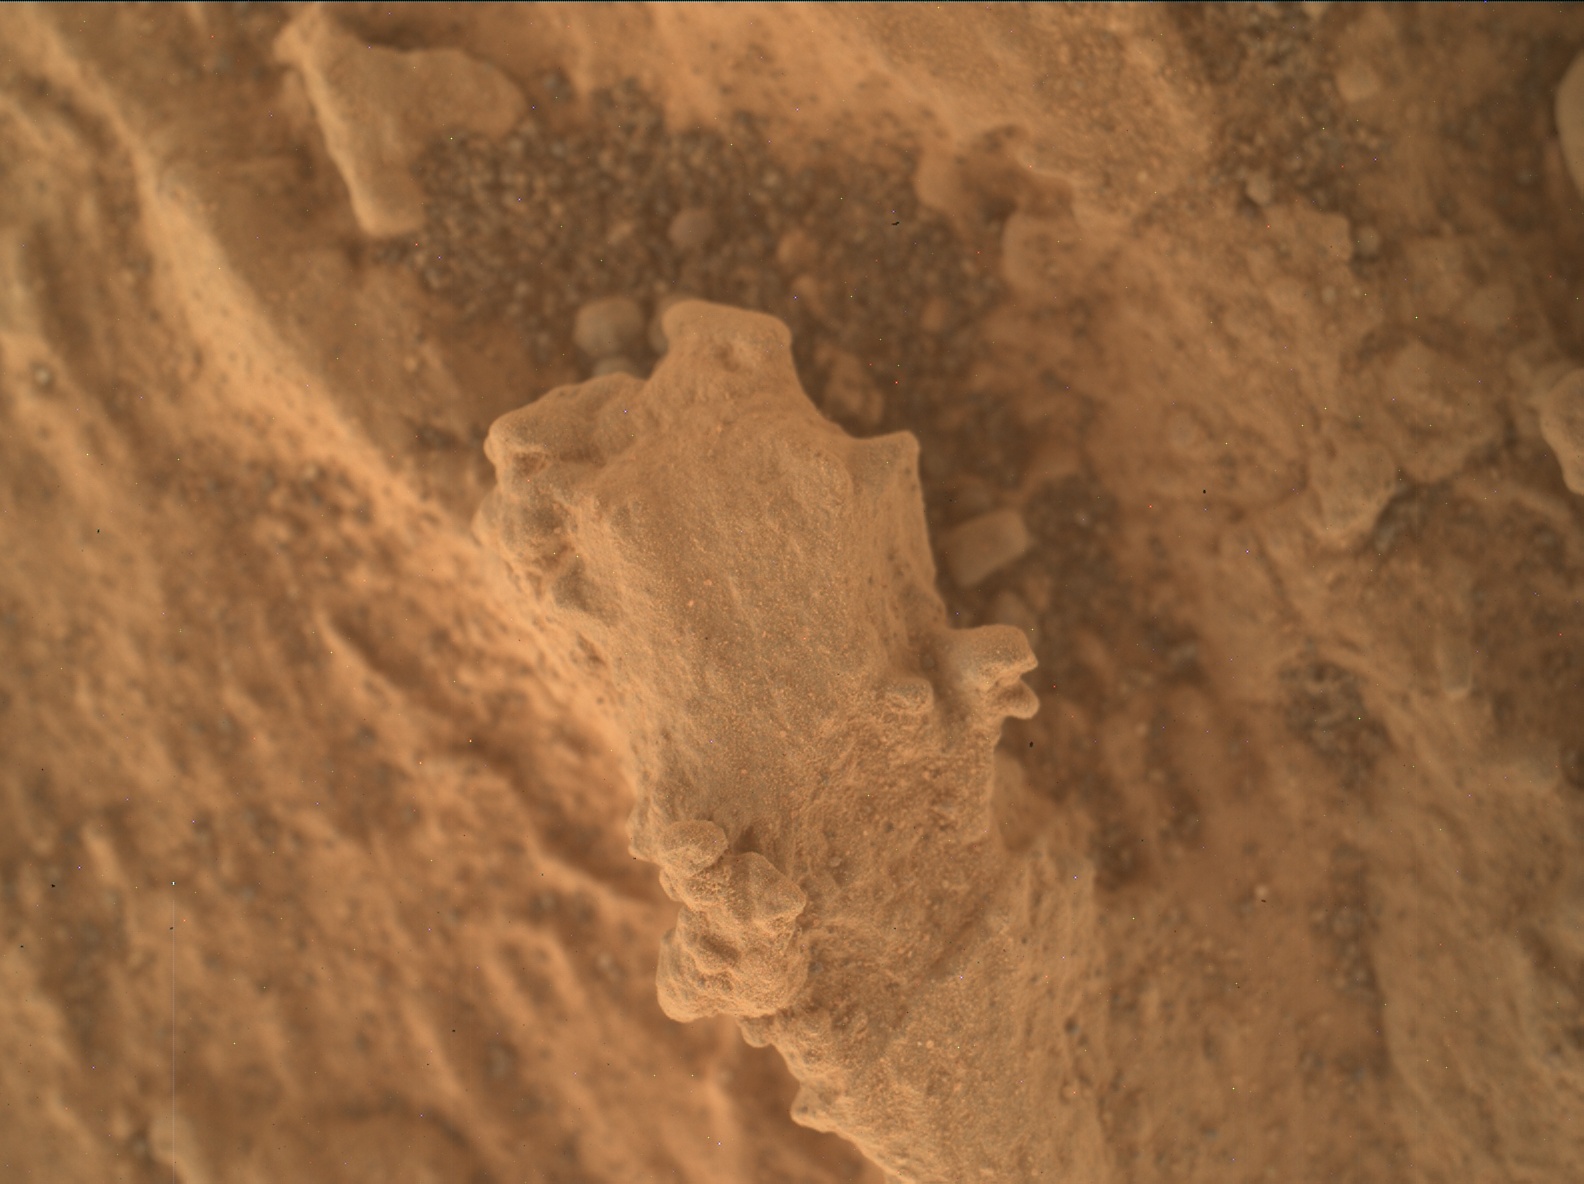 Nasa's Mars rover Curiosity acquired this image using its Mars Hand Lens Imager (MAHLI) on Sol 3197